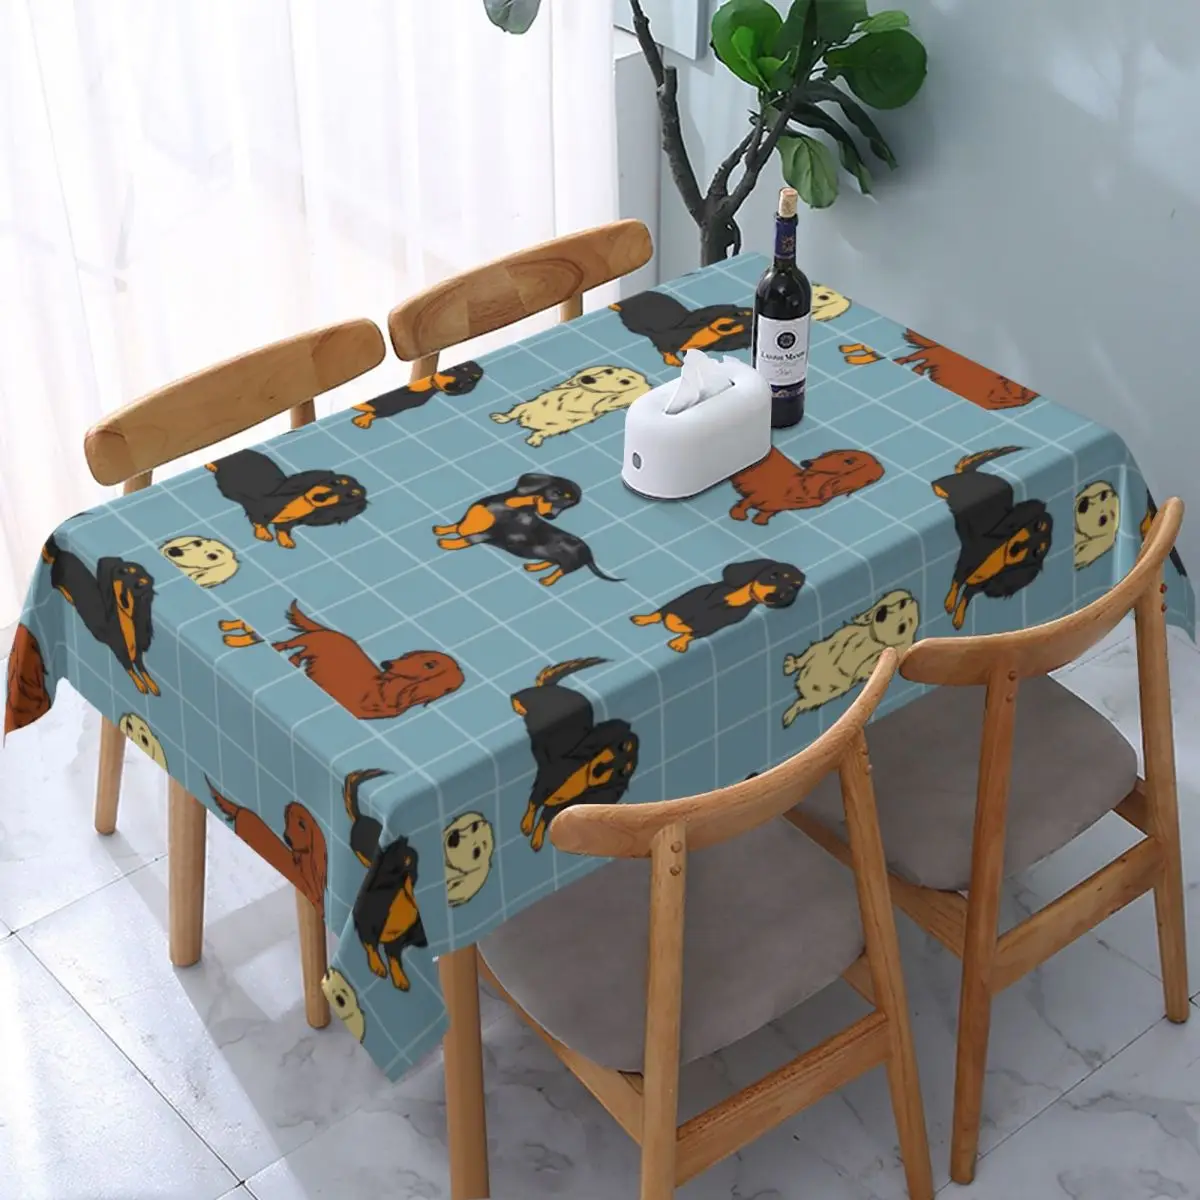 

Cute Dachshund Tablecloth Rectangular Elastic Waterproof Wiener Sausage Badger Dog Table Cloth Cover for Party